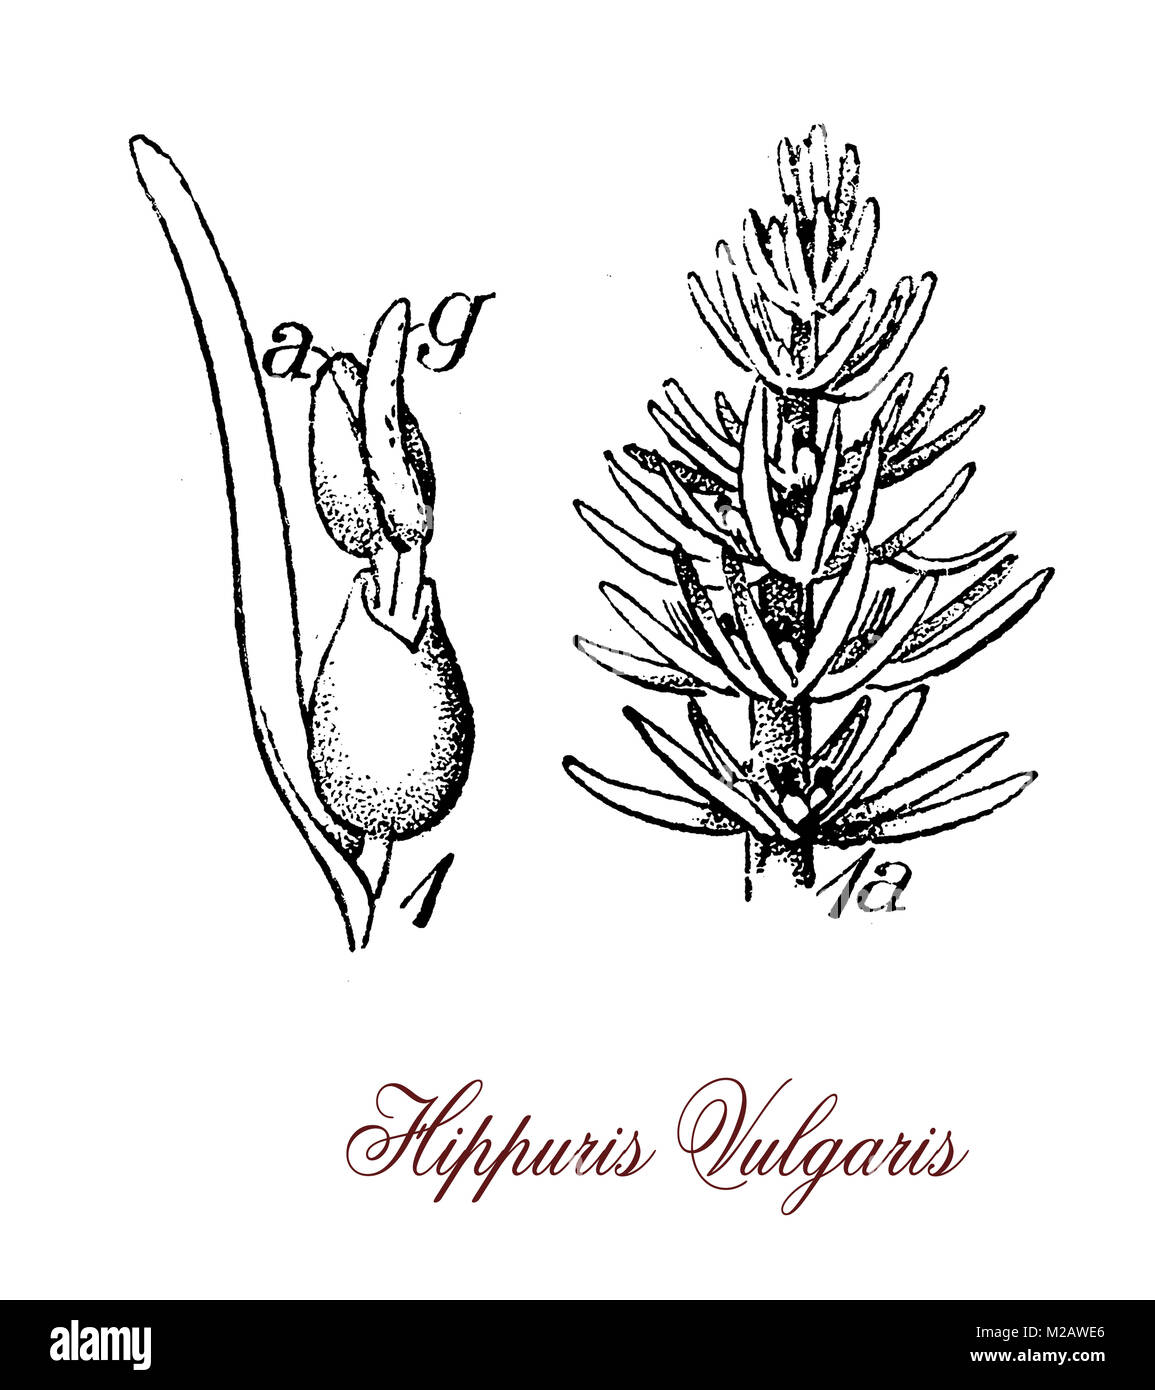 vintage engraving of hippuris vulgaris,aquatic plant of shallow waters or mud, used in herbal medicine for healing wounds Stock Photo